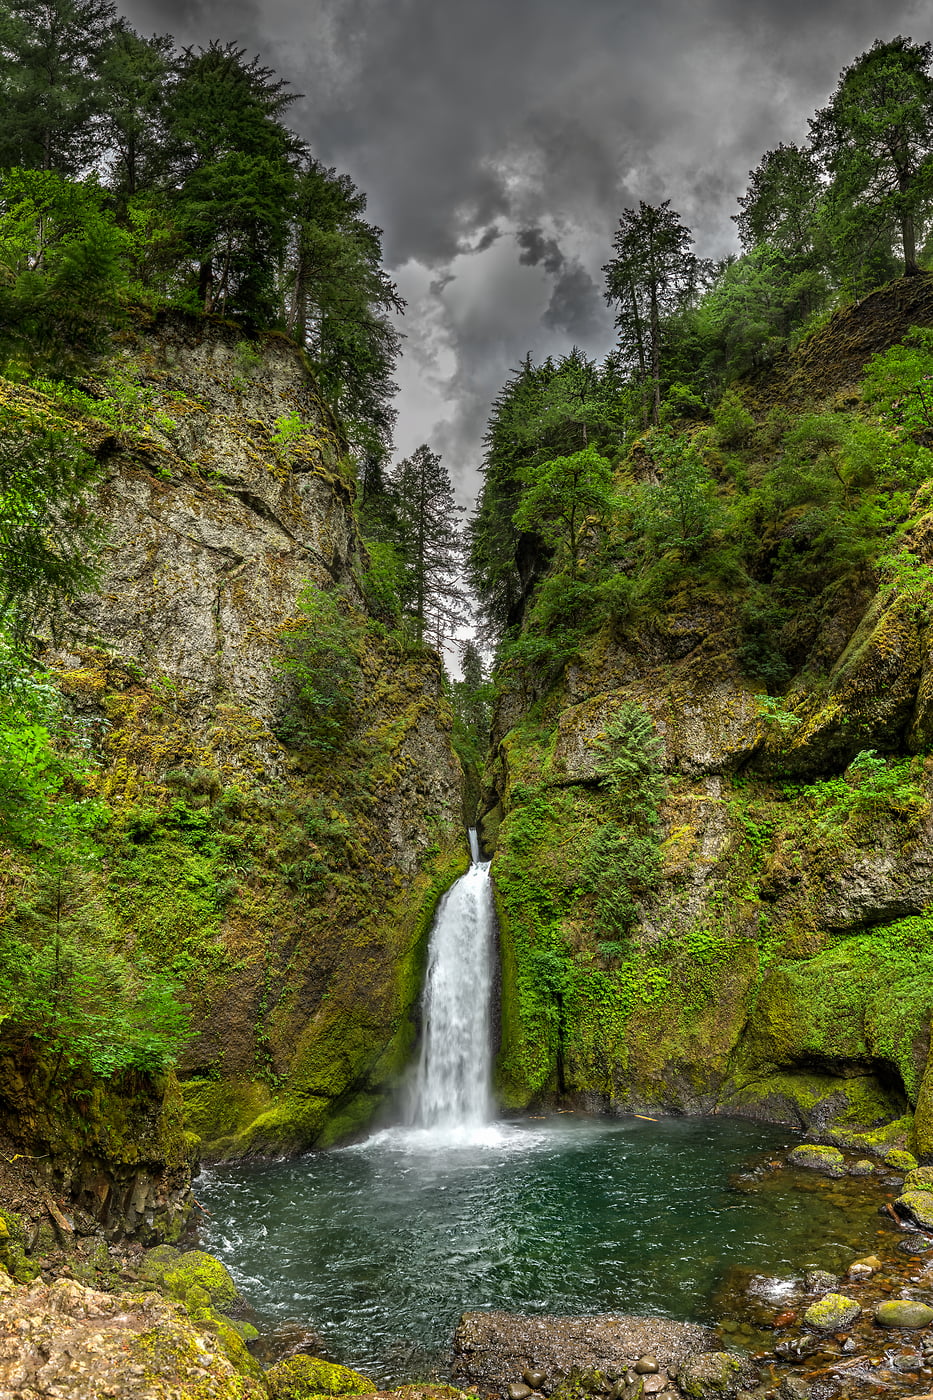 418 megapixels! A very high resolution, large-format VAST photo print of Wahclella Falls created by Tim Lo Monaco in Columbia River Gorge, Oregon.